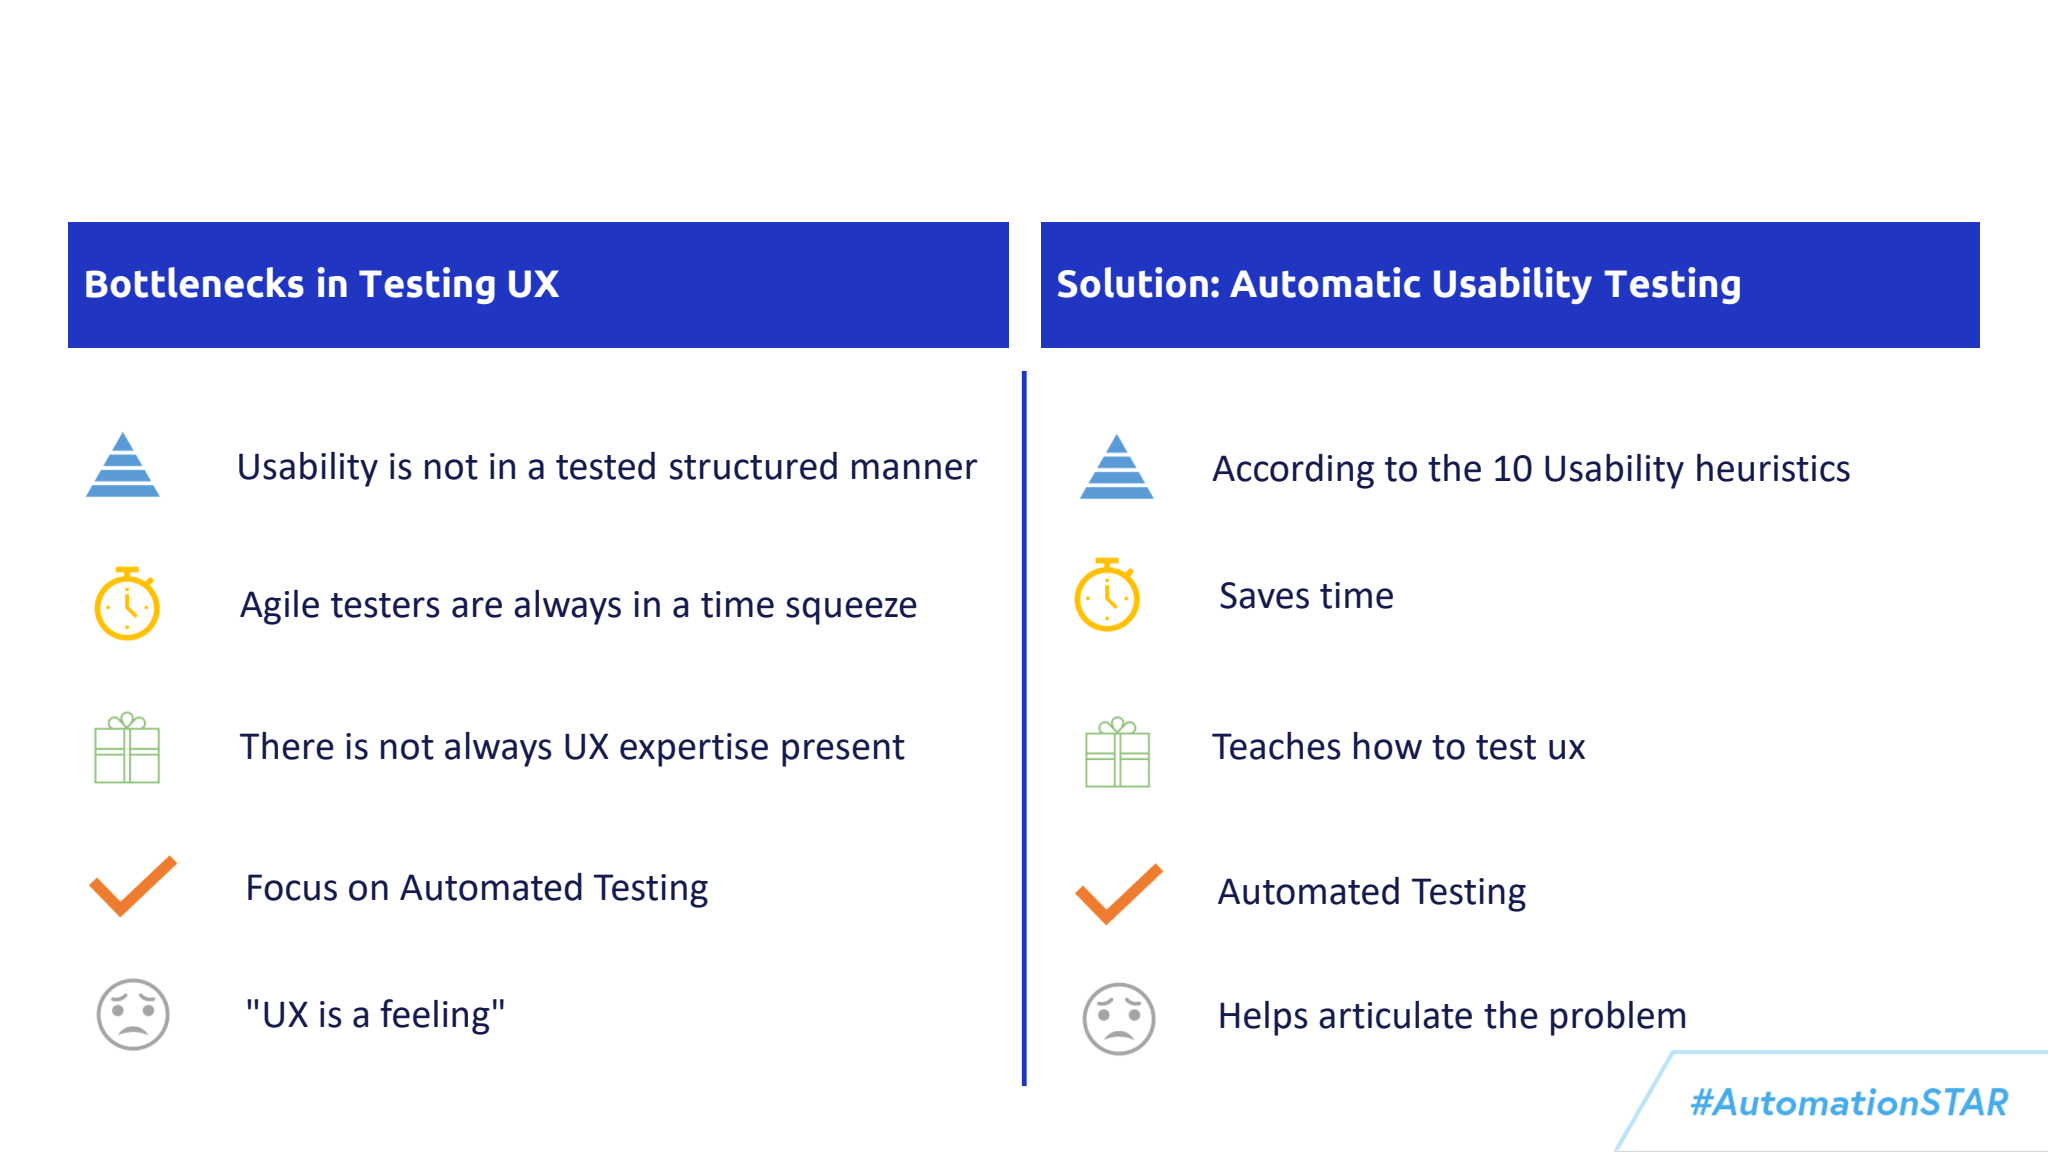 Figure 2: How bottlenecks in UX can be solved by Automatic Usability Testing